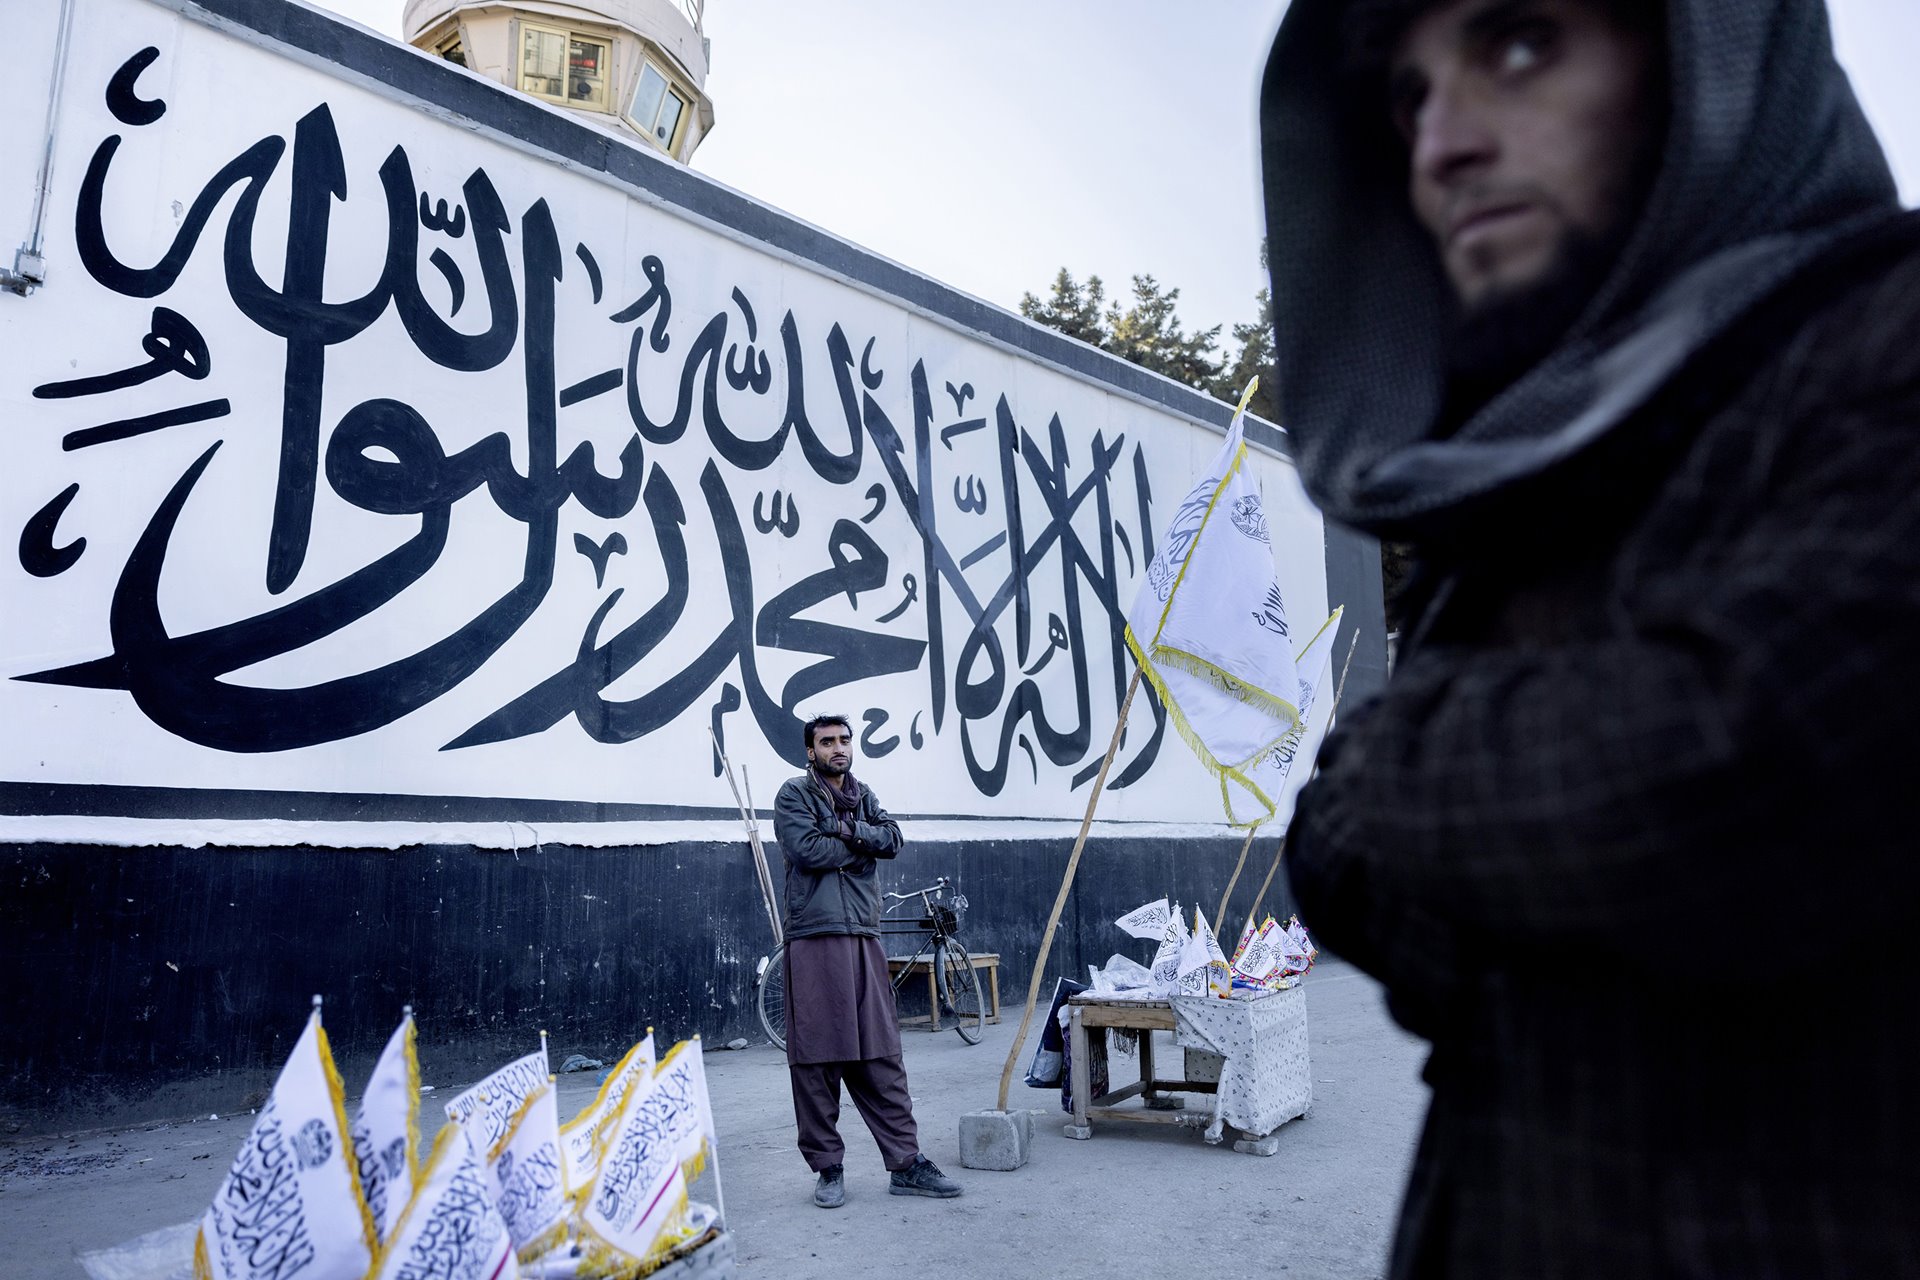 The Islamic declaration of faith, &quot;There is no God but Allah, and Muhammad is His messenger&quot;, covers the wall of the former US Embassy in Kabul, Afghanistan. In front of the wall, street vendors sell Taliban flags and other merchandise. US diplomats negotiated with the Taliban in August 2021 to spare the embassy after the evacuation &nbsp;in exchange for future aid.